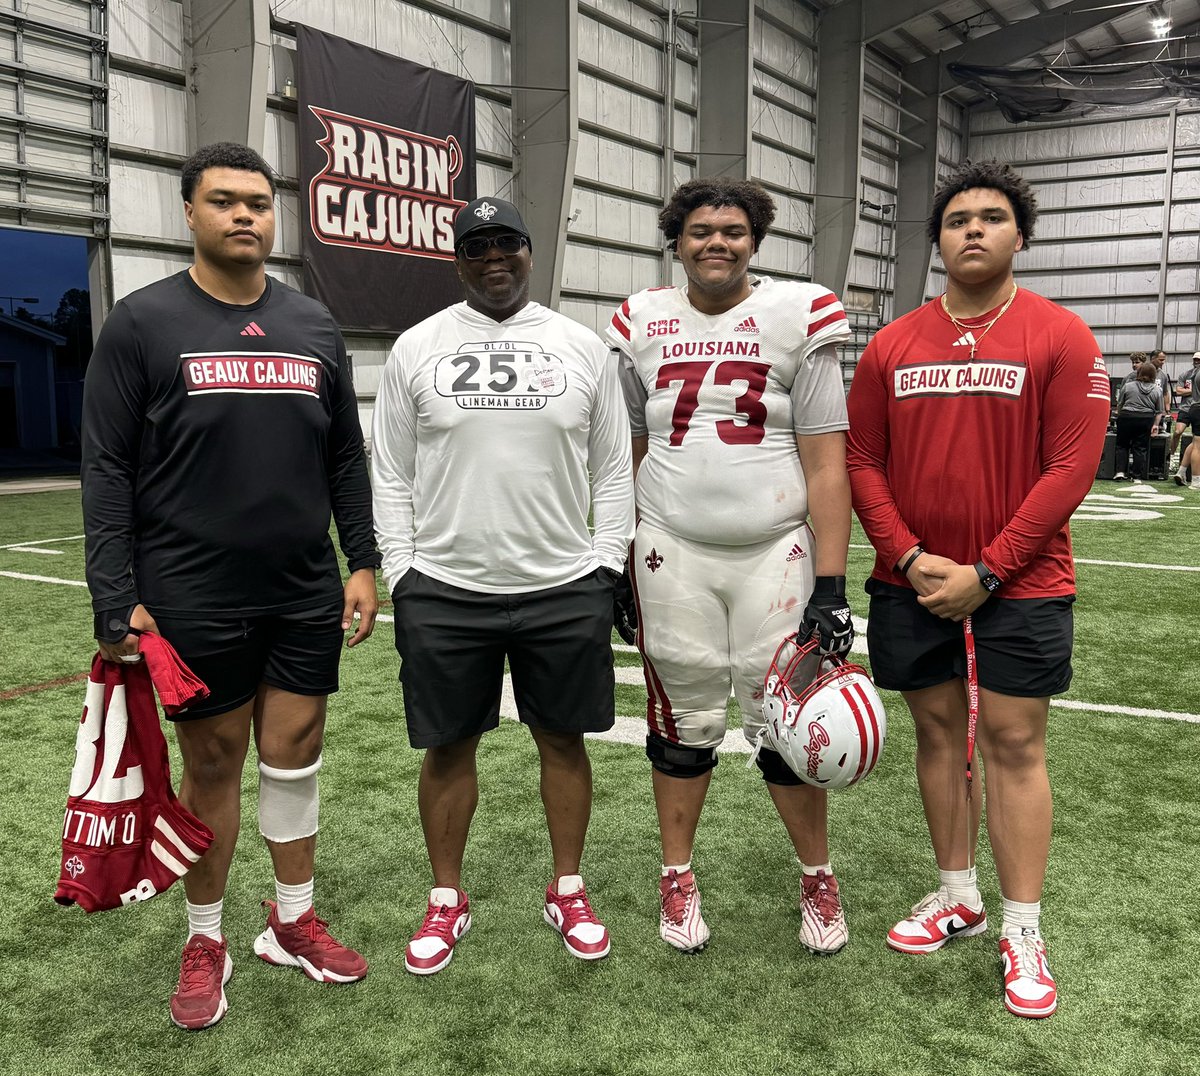 These 4️⃣ are my world and Louisiana has ✌🏽of them. Love watching my boys play and grow in their element. Can’t wait to see what the fall brings. Geaux Cajuns ❤️🤟🏽